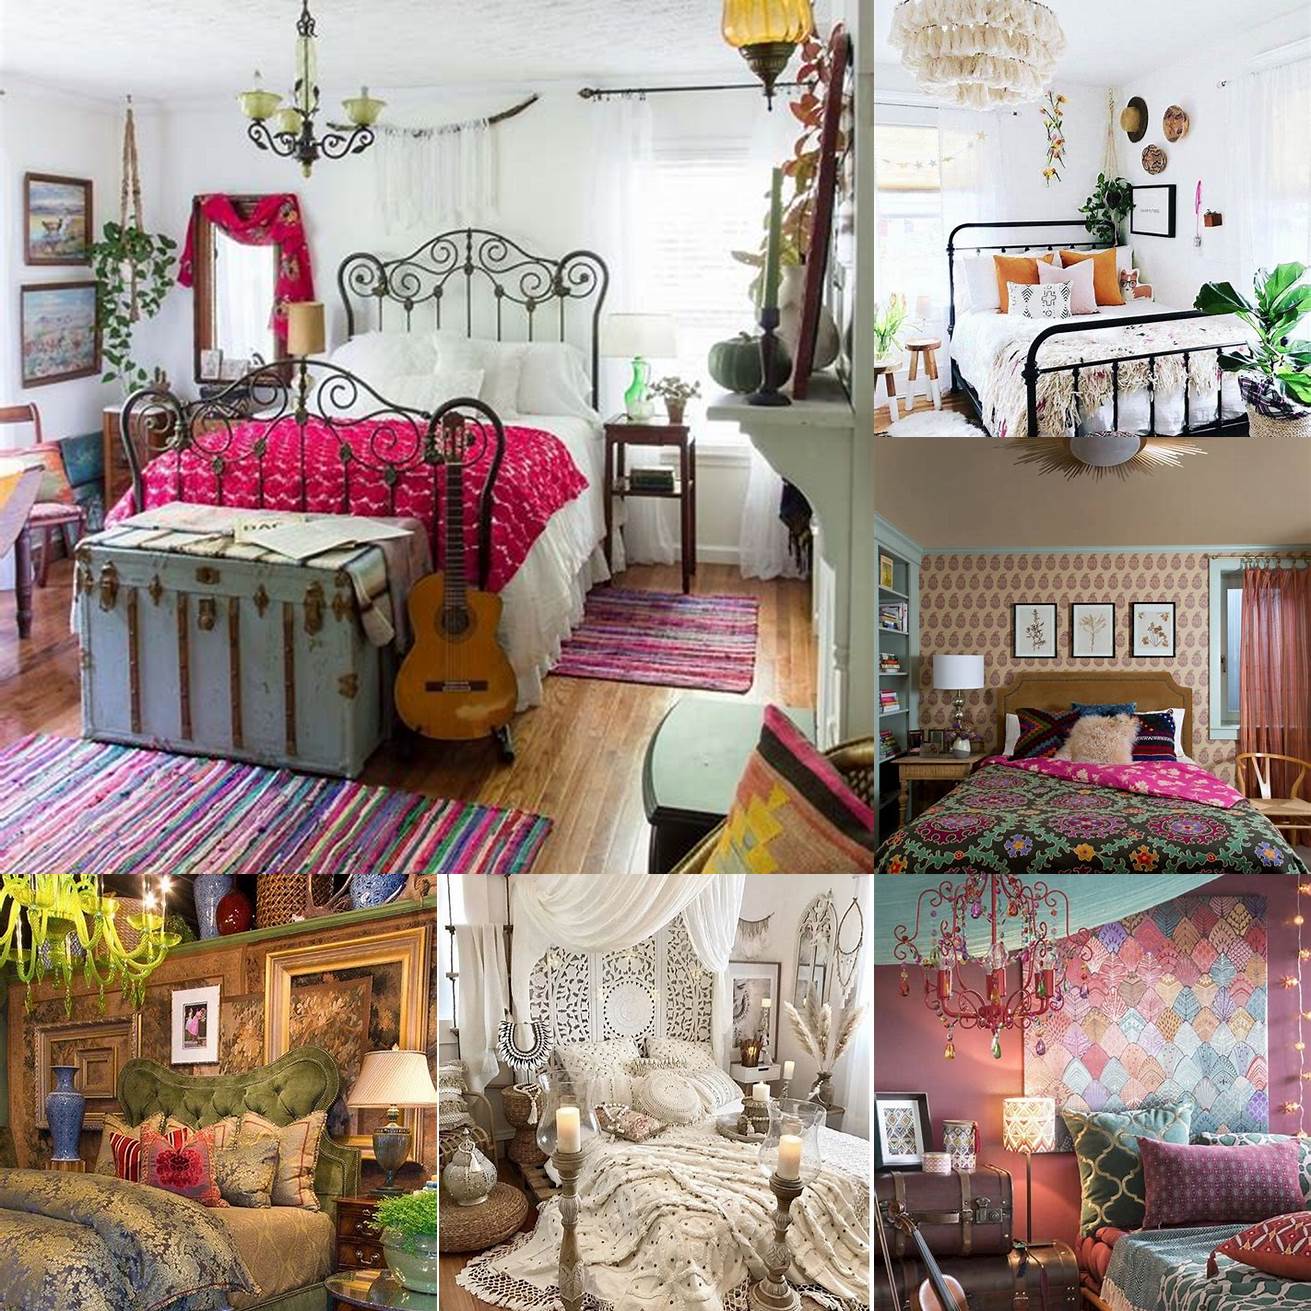 Mixing Shabby Chic with bohemian style creates a unique and eclectic bedroom design